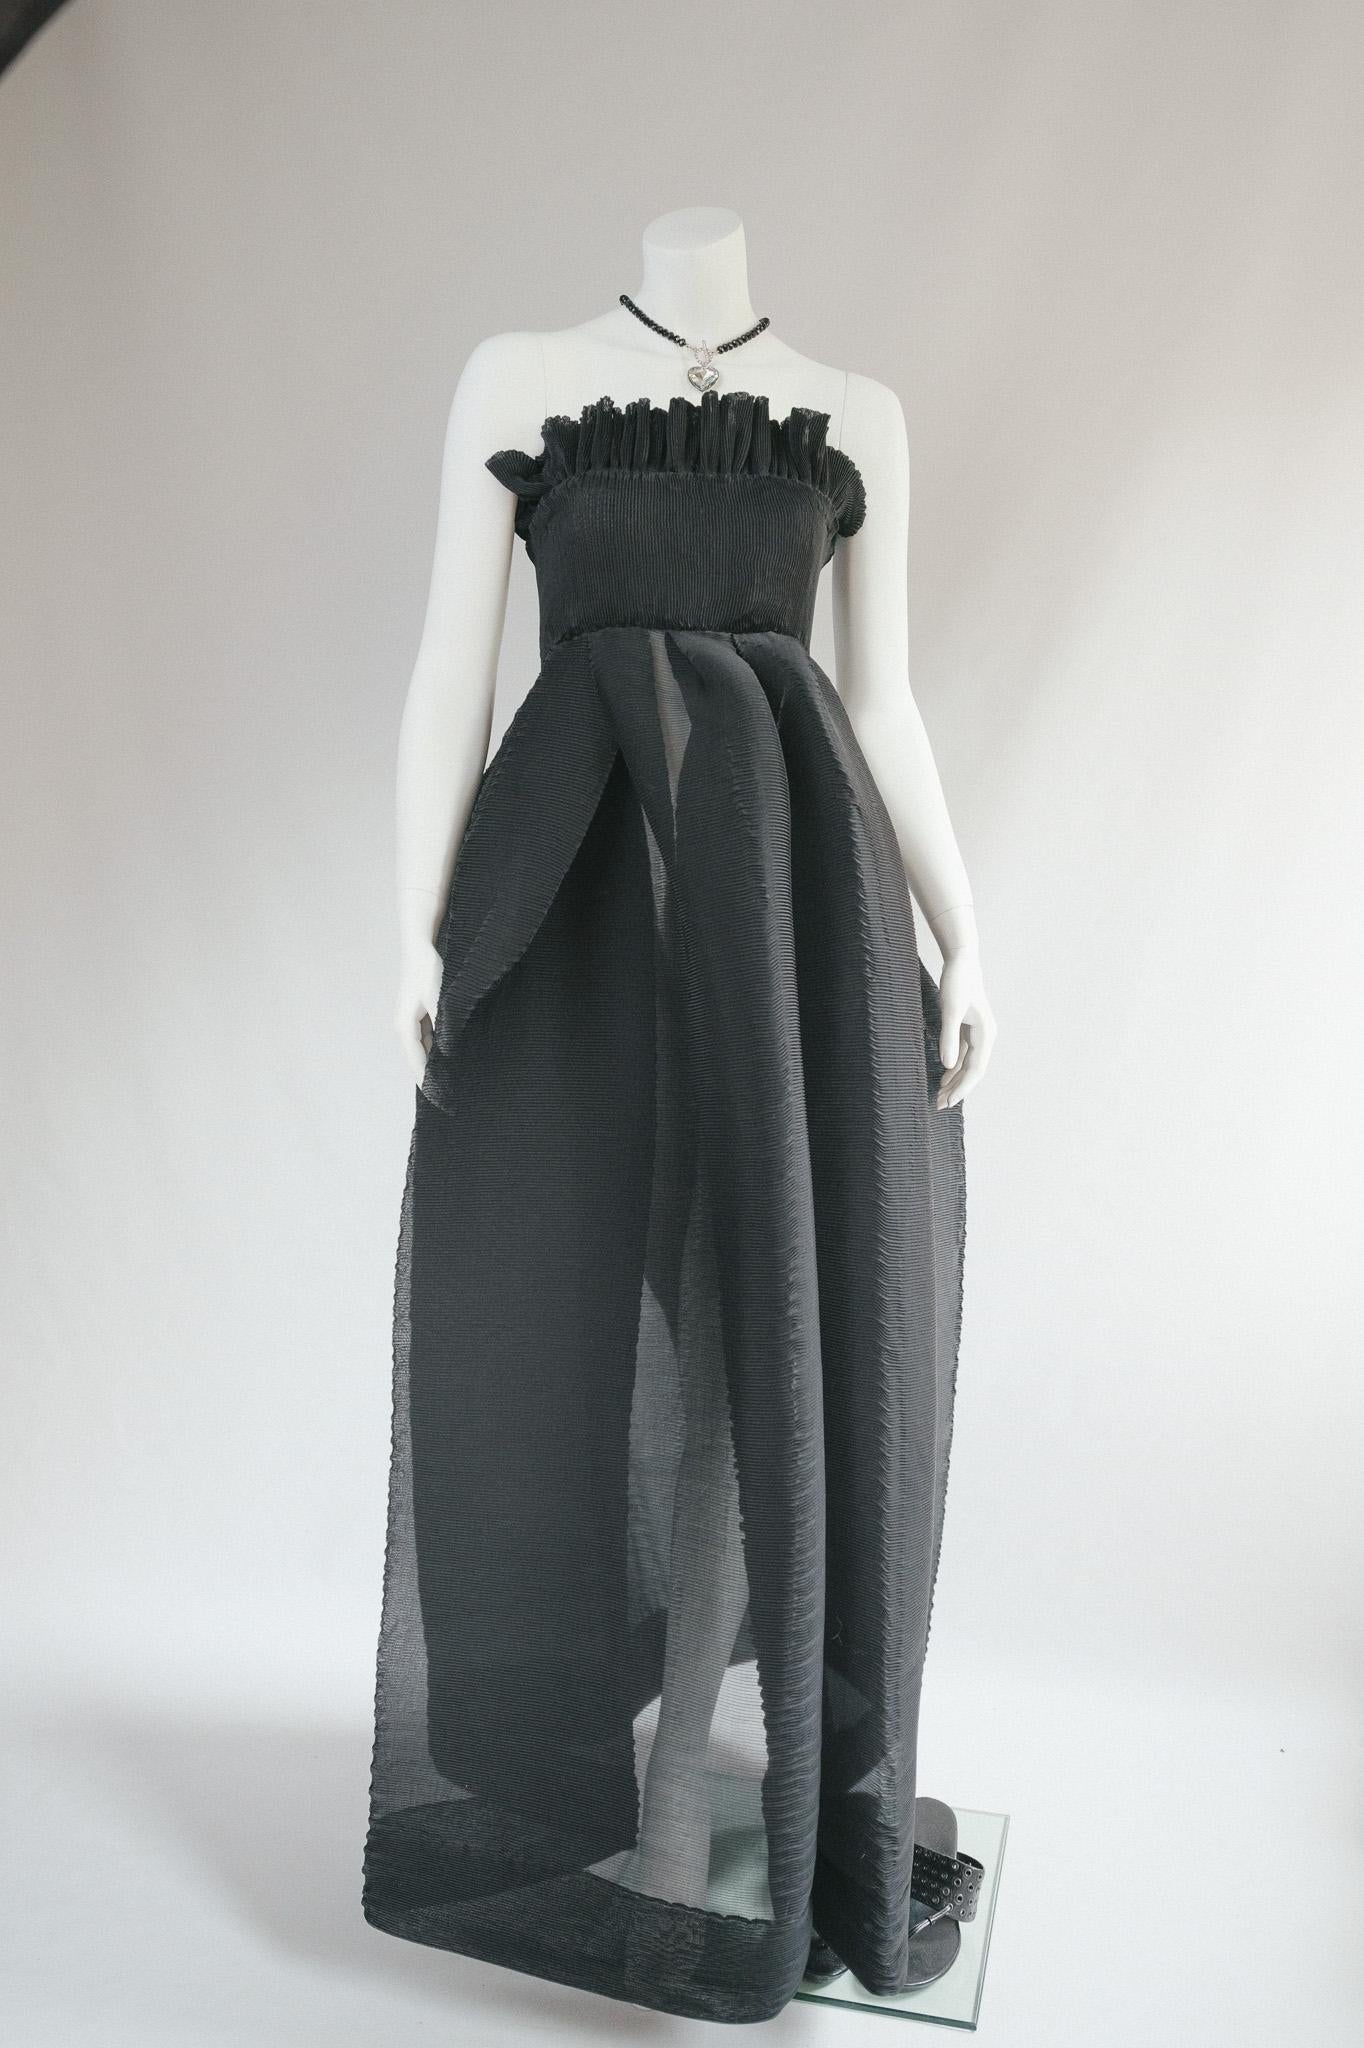 Archival Couture early 1988 Romeo Gigli Pleated Pliss Gown
Insane black pleated semi sheer origami dress
Fitted ruffle button bust with ruffed detail
extravagant semi sheer structural origami skirt
Pictures say it all really.
Perfect for an event or